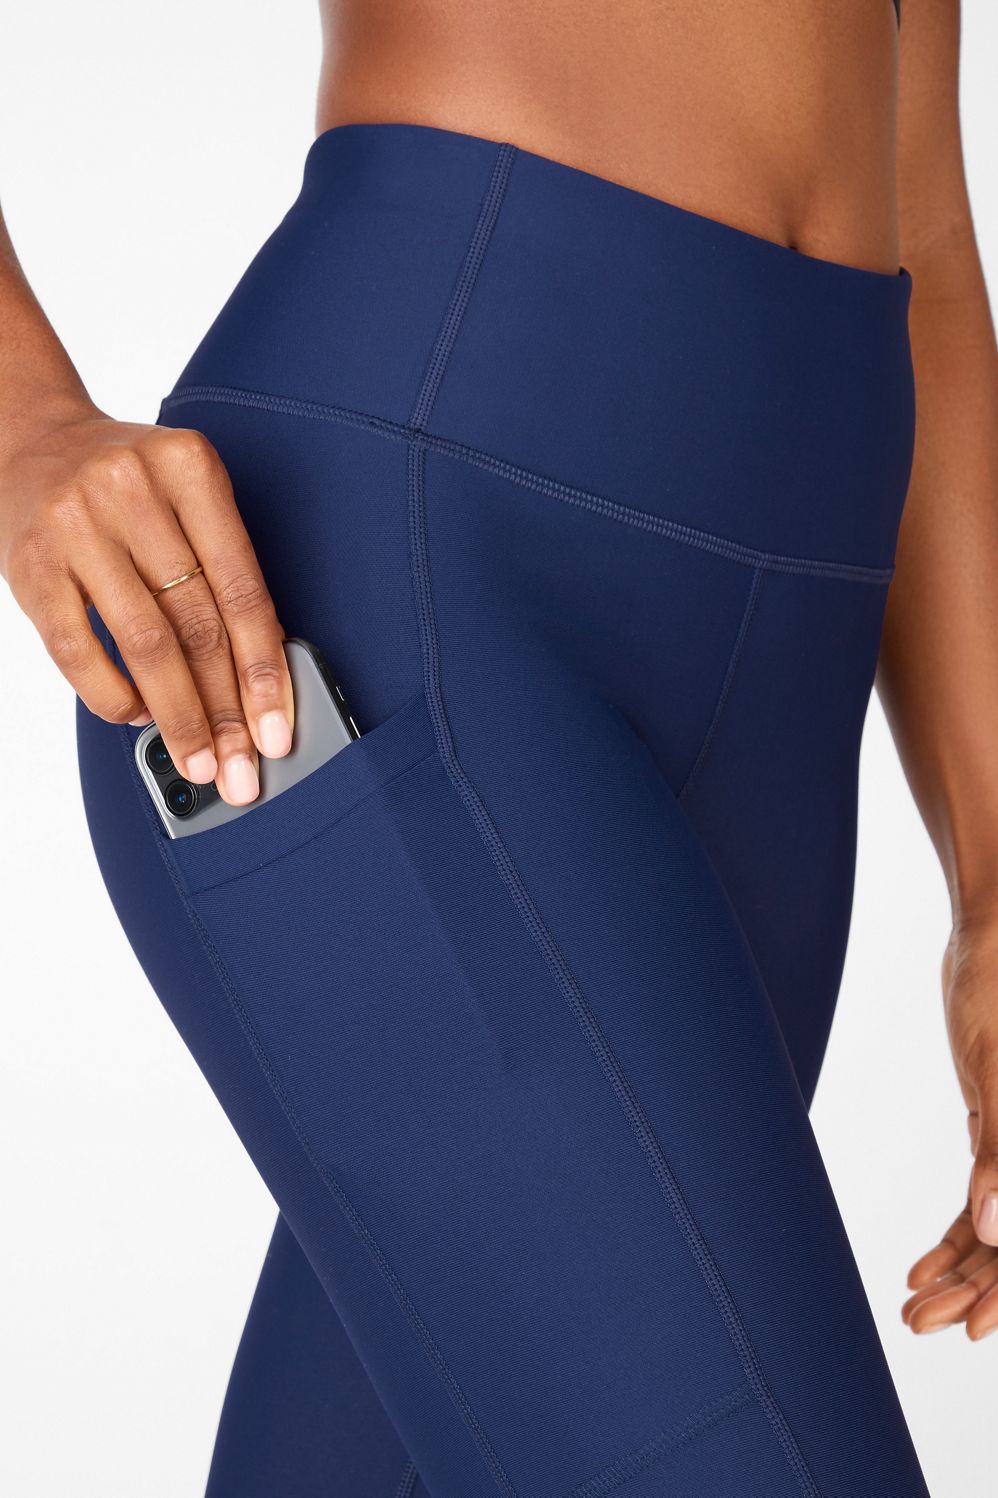 Navy Fade Leggings with pockets